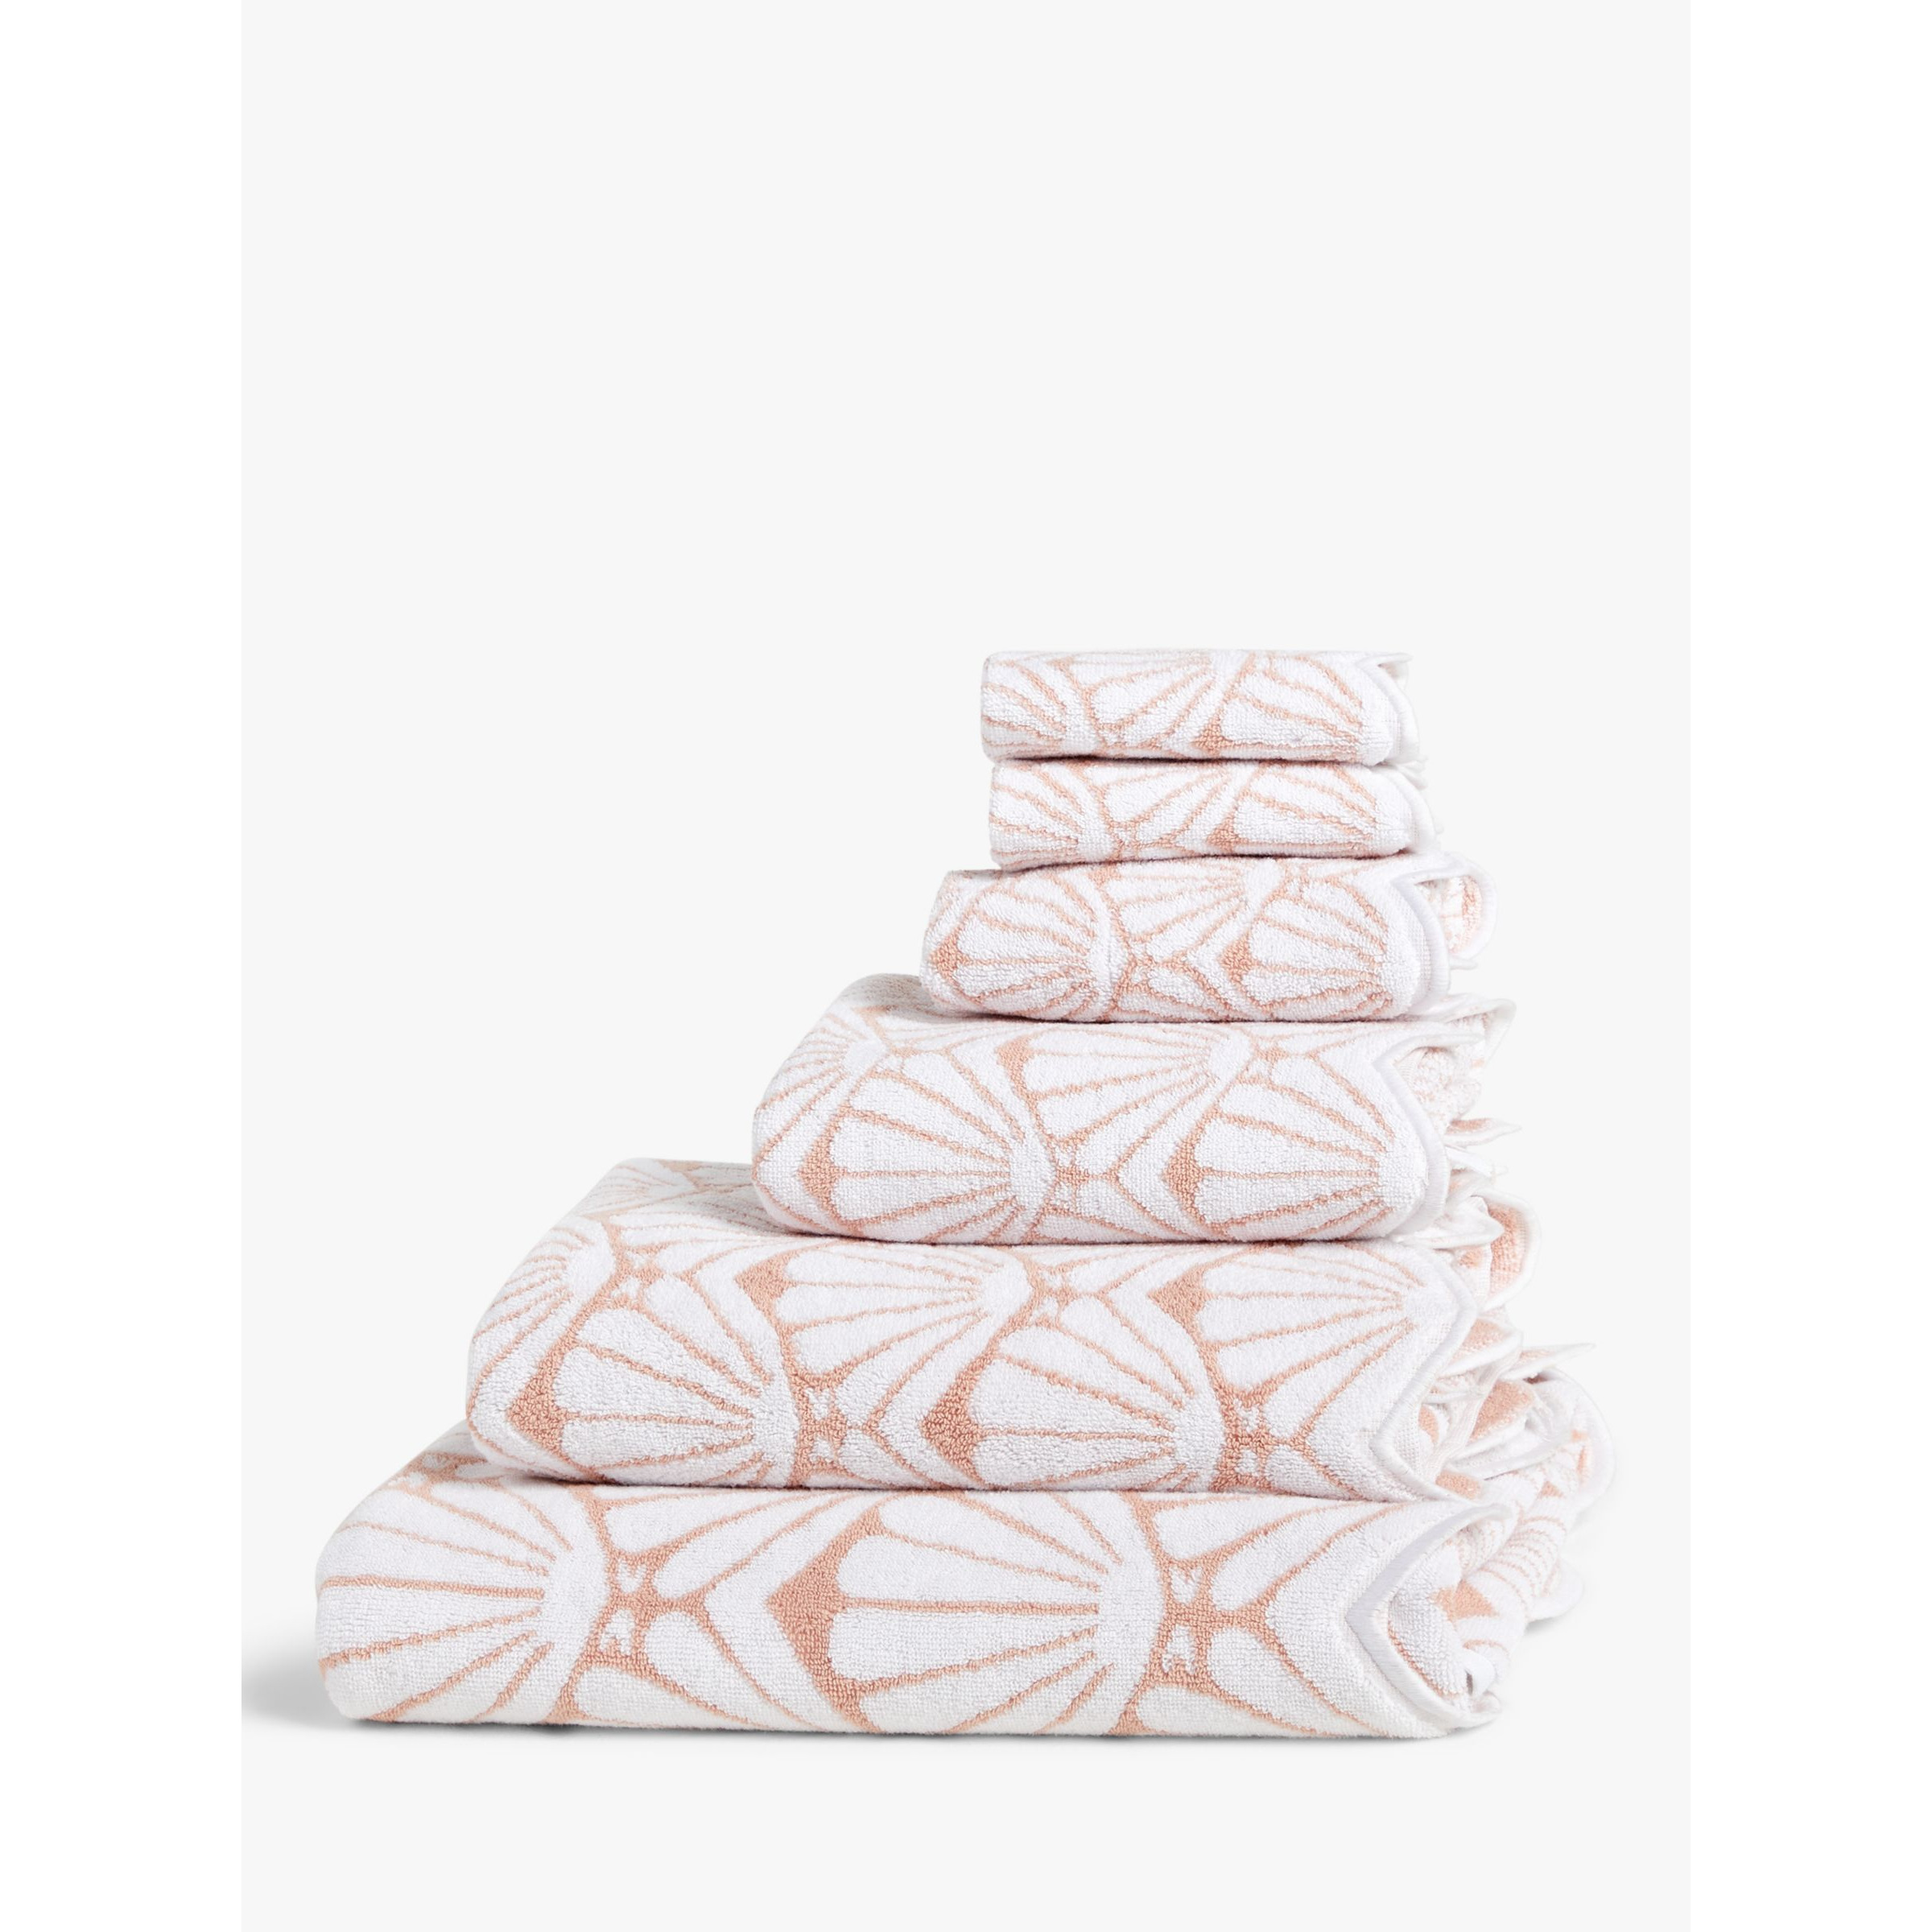 John Lewis Scallop Shell Towels - image 1